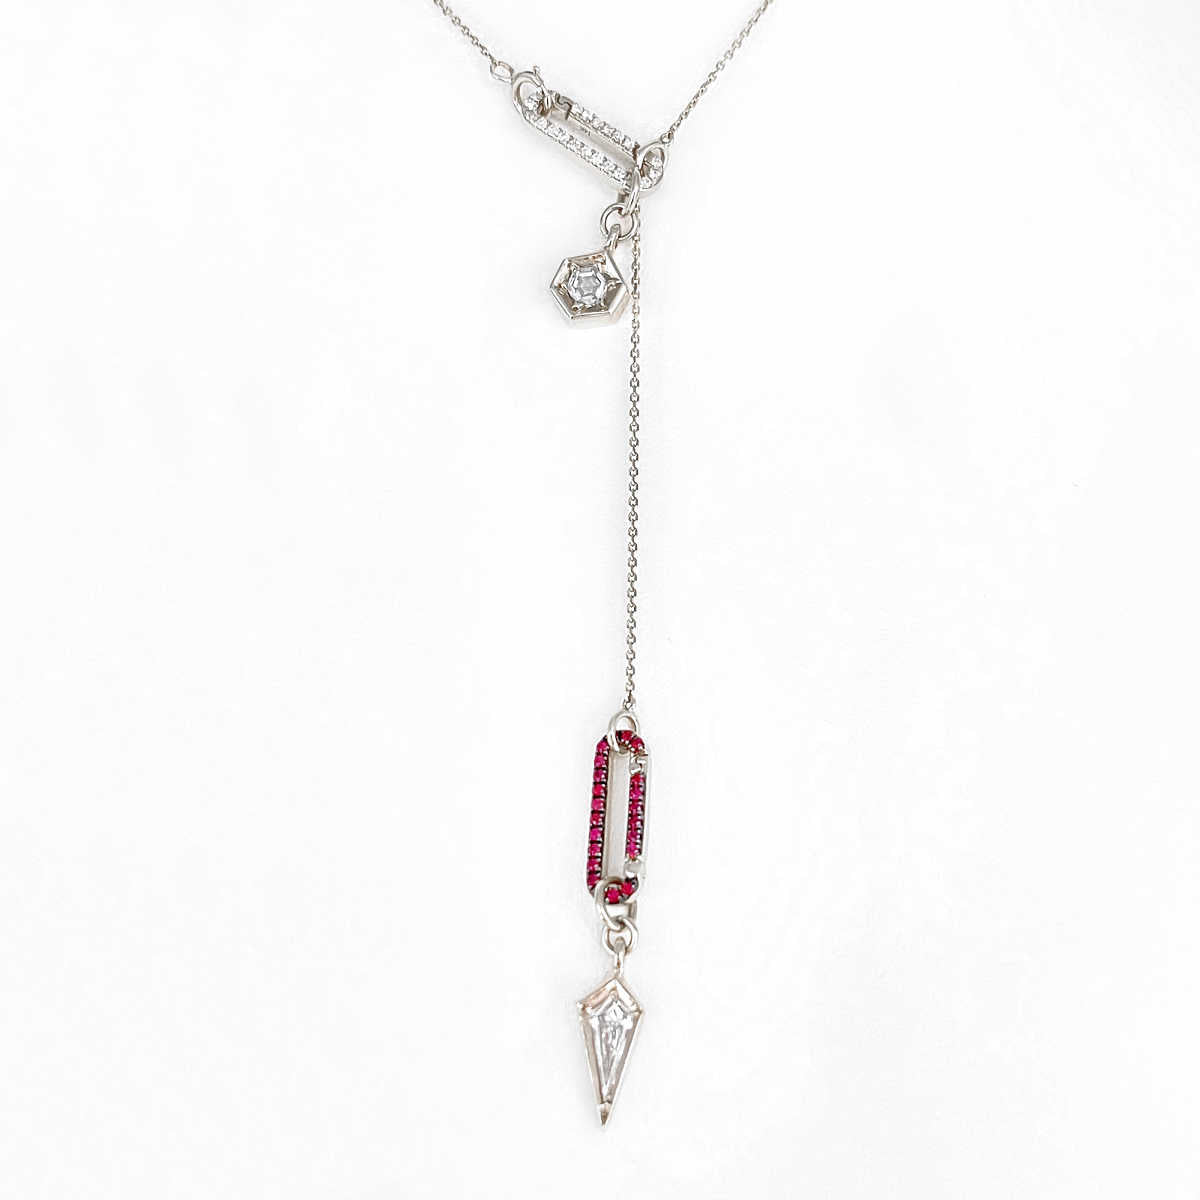 14k White Gold & Ruby Charm Clip on Necklace